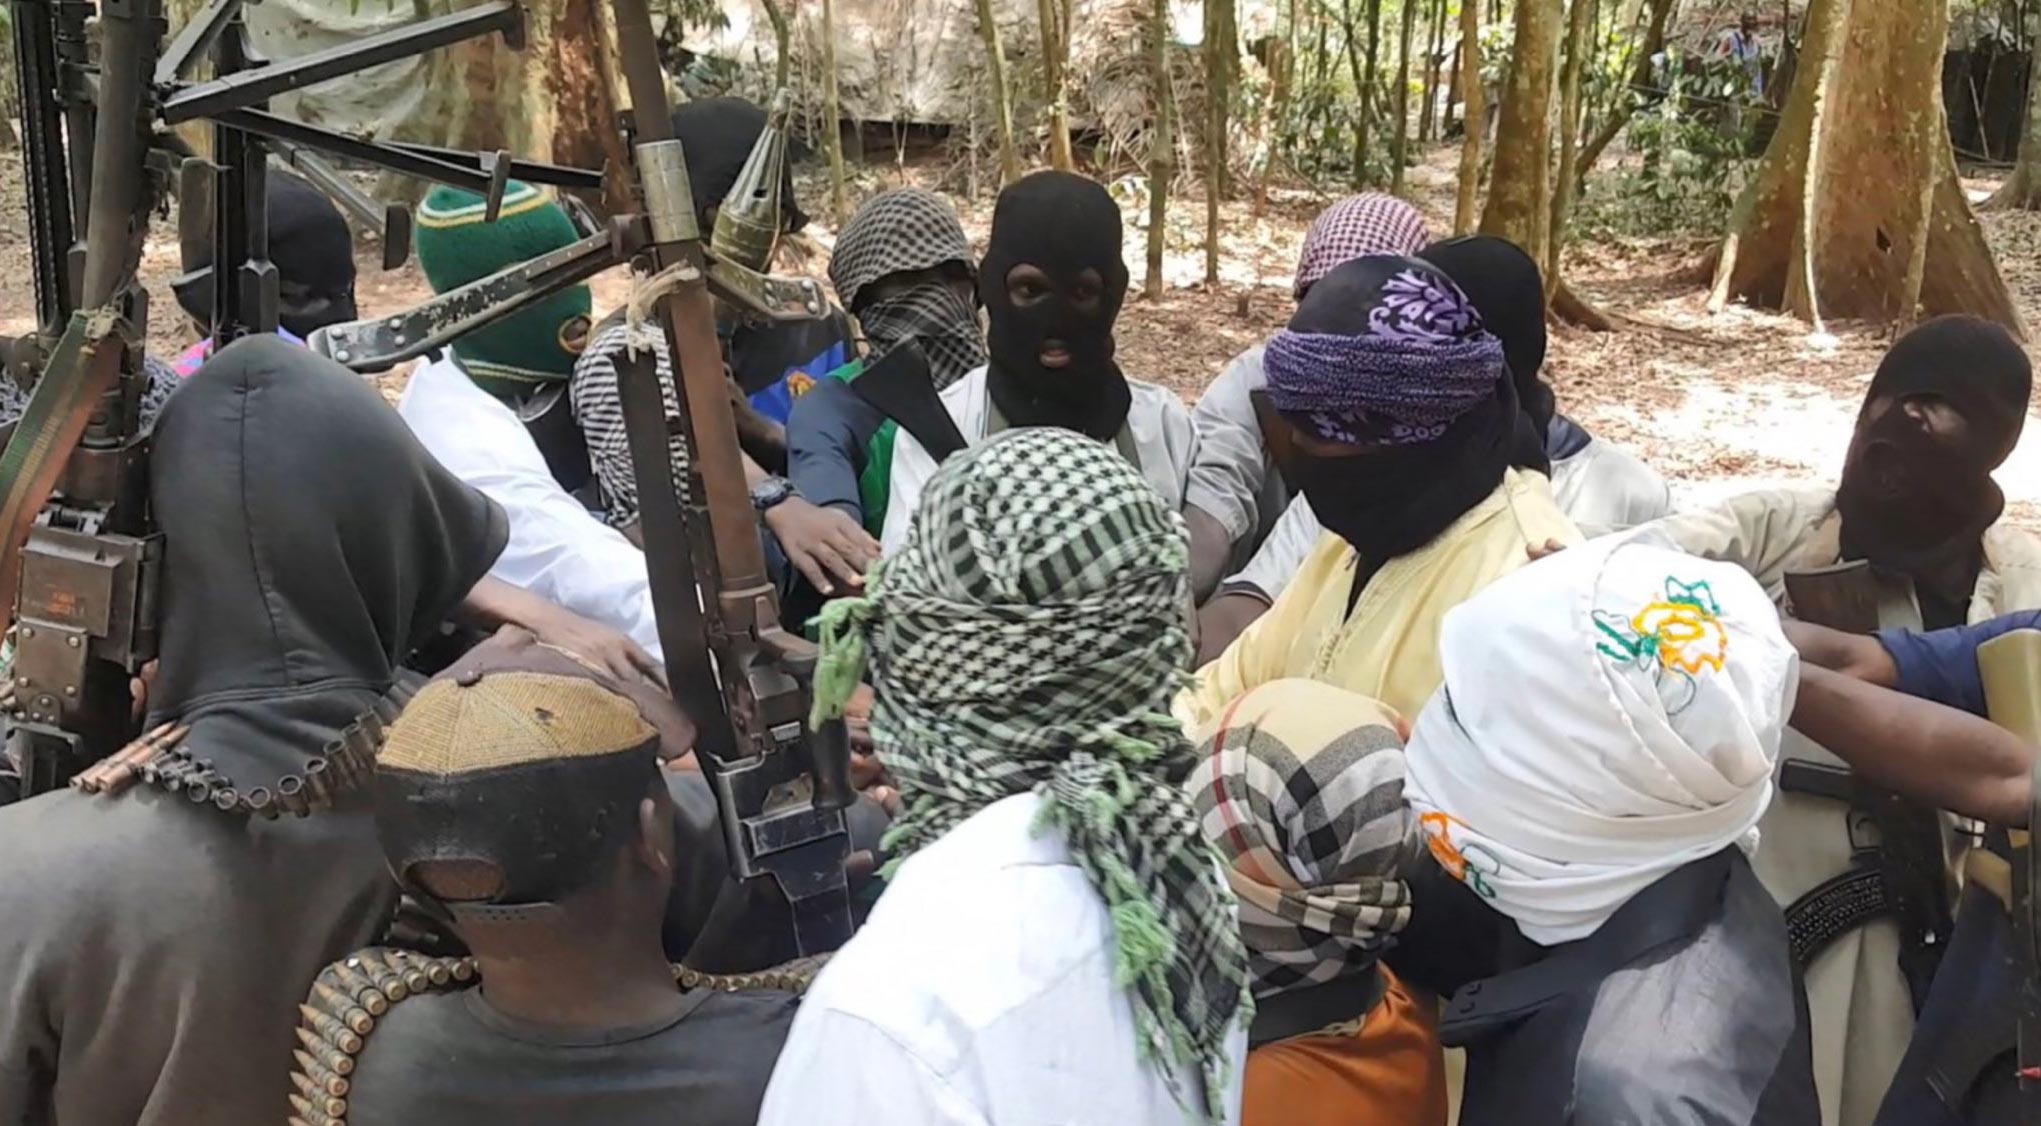 Islamic State Central Africa Province militants in DR Congo